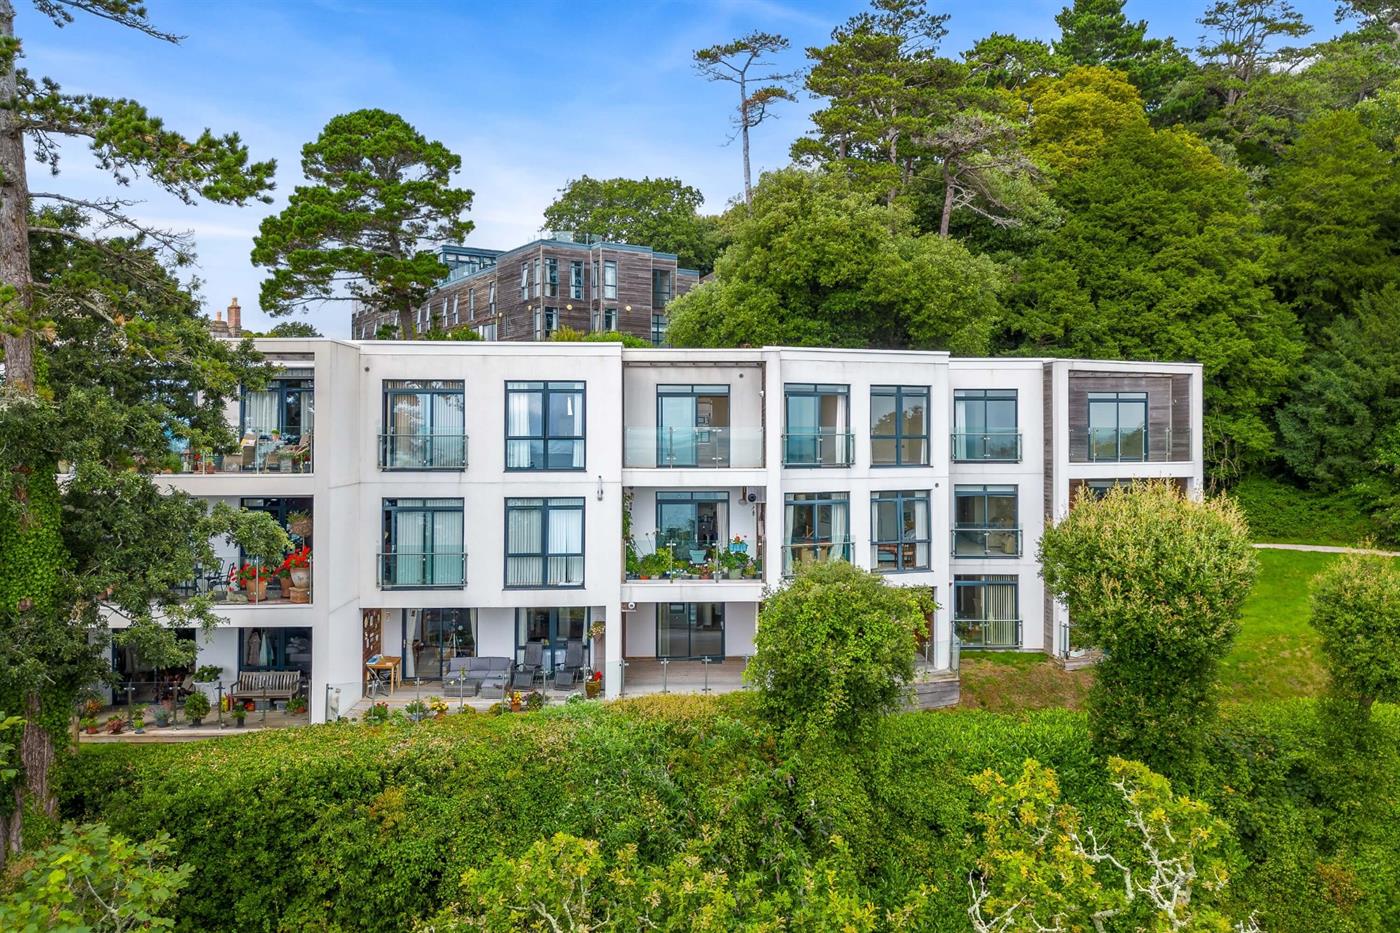 1 Bedroom Apartment for Sale: Thatcher View, Middle Lincombe Road, Torquay, TQ1 2AW